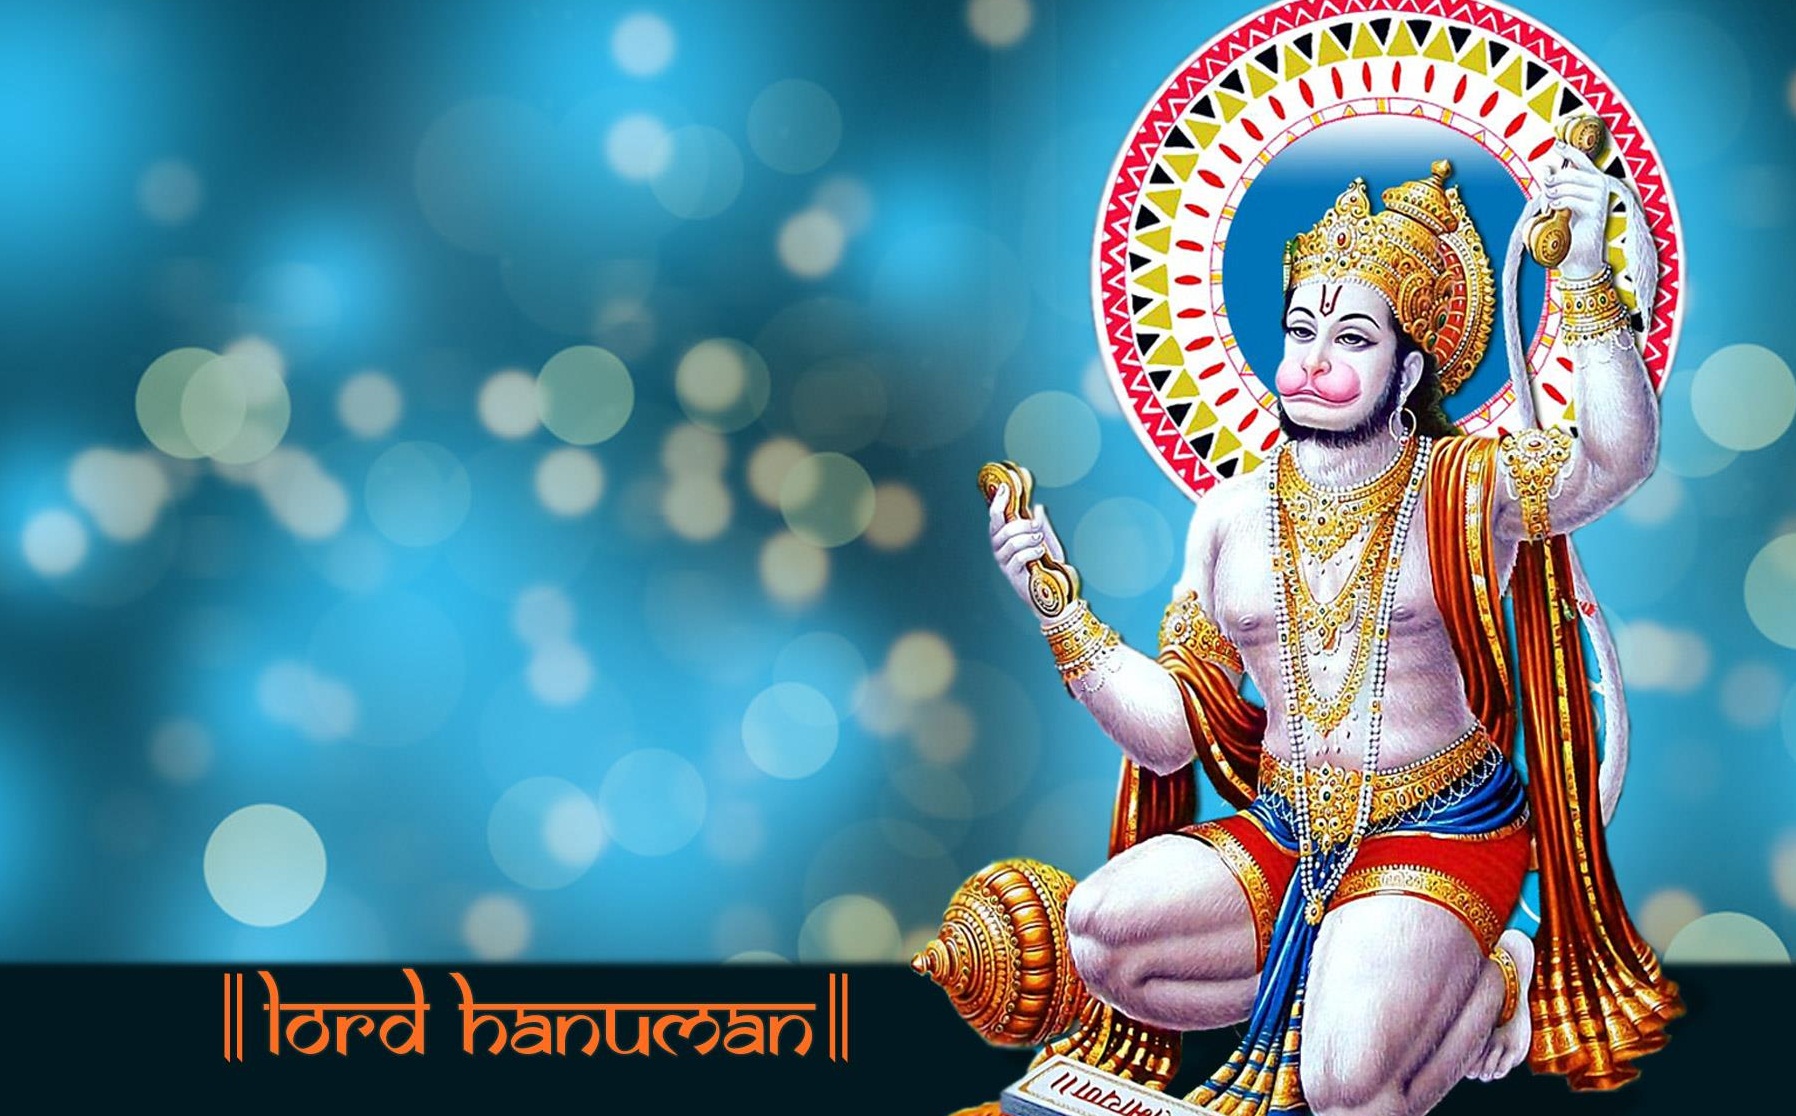 Hindu God Wallpapers for Mobile Phones, God Images & HD Photos